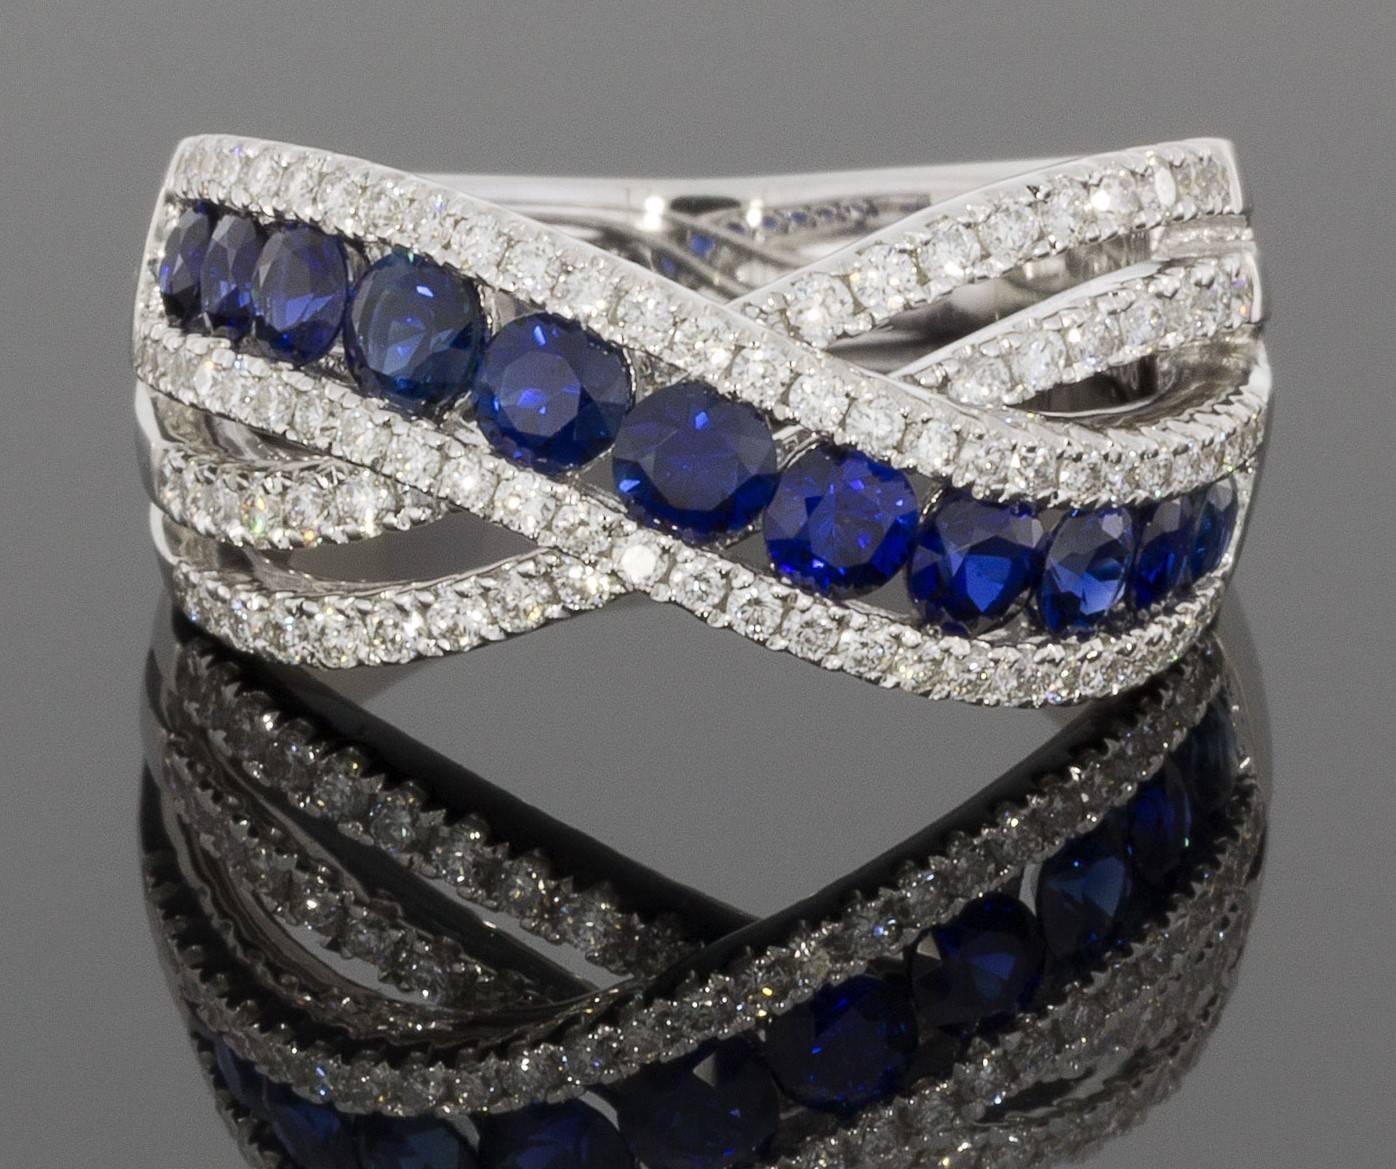 This breathtaking ring features a 1.08 carats in natural, AAA quality, round cut, blue sapphires & .57 carats in sparkly, FG/VS quality, round brilliant cut diamonds. The combined total carat weight is 1.65 carats. This gorgeous sapphire &